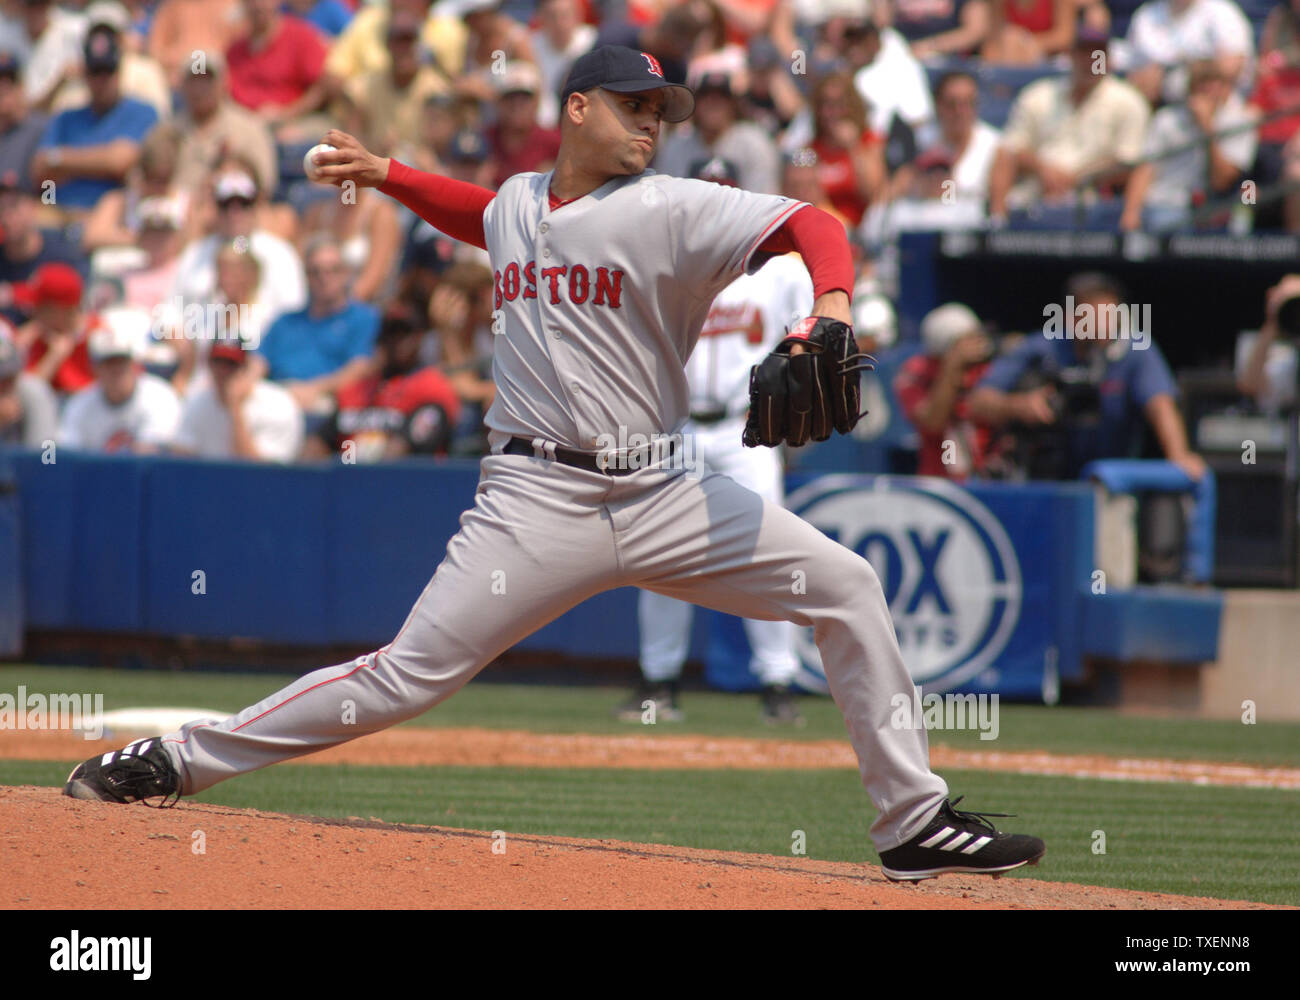 Boston Red Sox relief pitcher Manny Delcarmen throws against the Atlanta Braves in the seventh inning June 17, 2006, in Atlanta's Turner Field. The Red Sox defeated the Braves 5-3 (UPI Photo/John Dickerson) Stock Photo